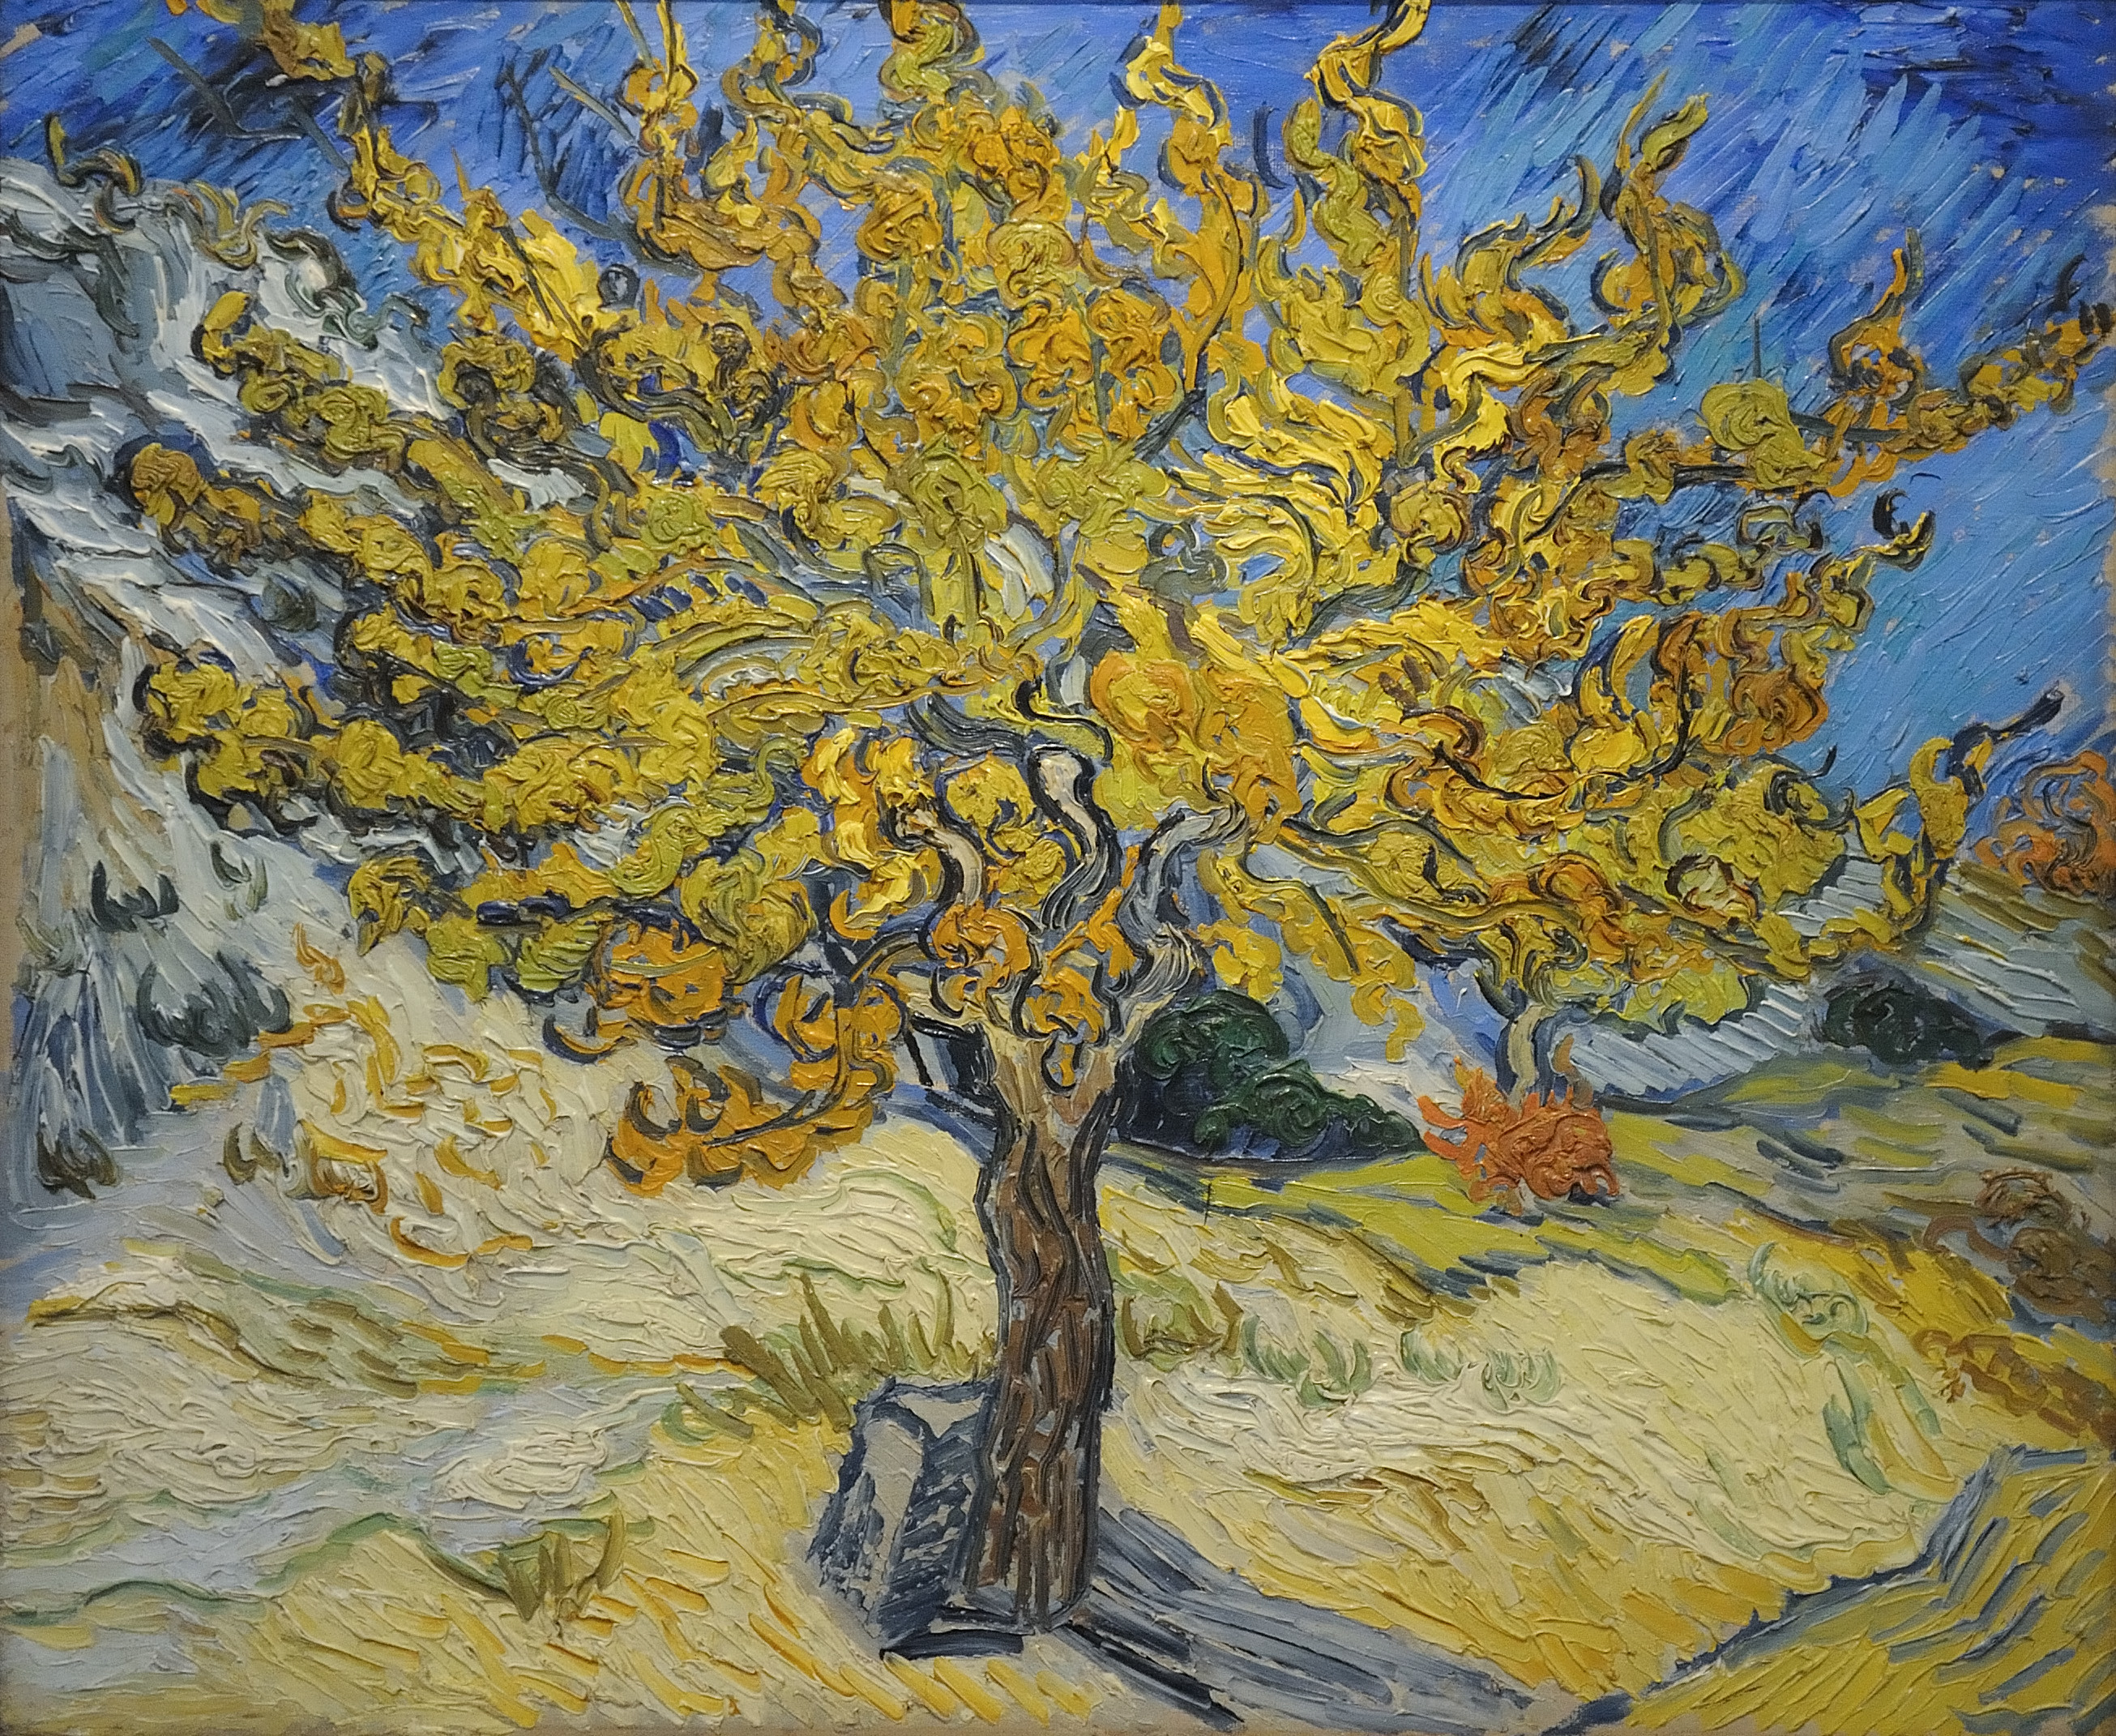 "Mulberry Tree" by Vincent van Gogh